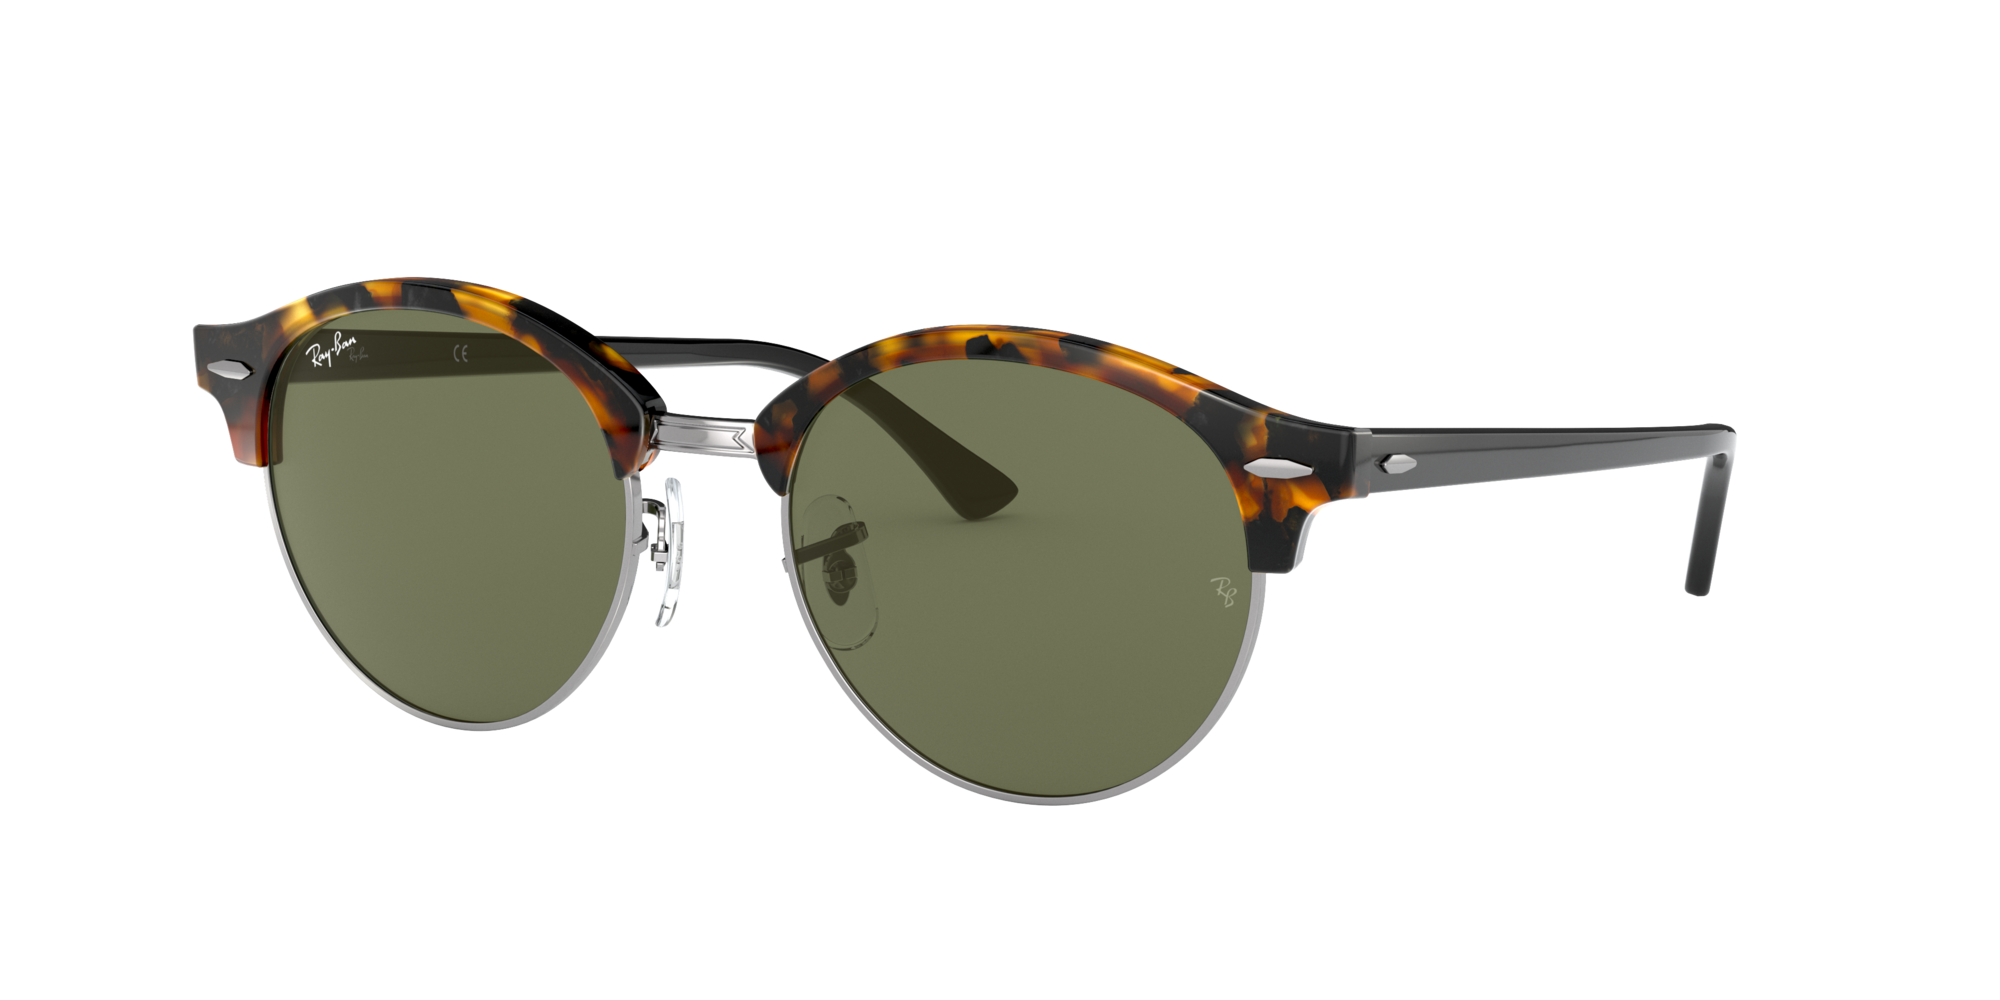 Ray-Ban 0RB4246 in Tortoise Sunglasses 